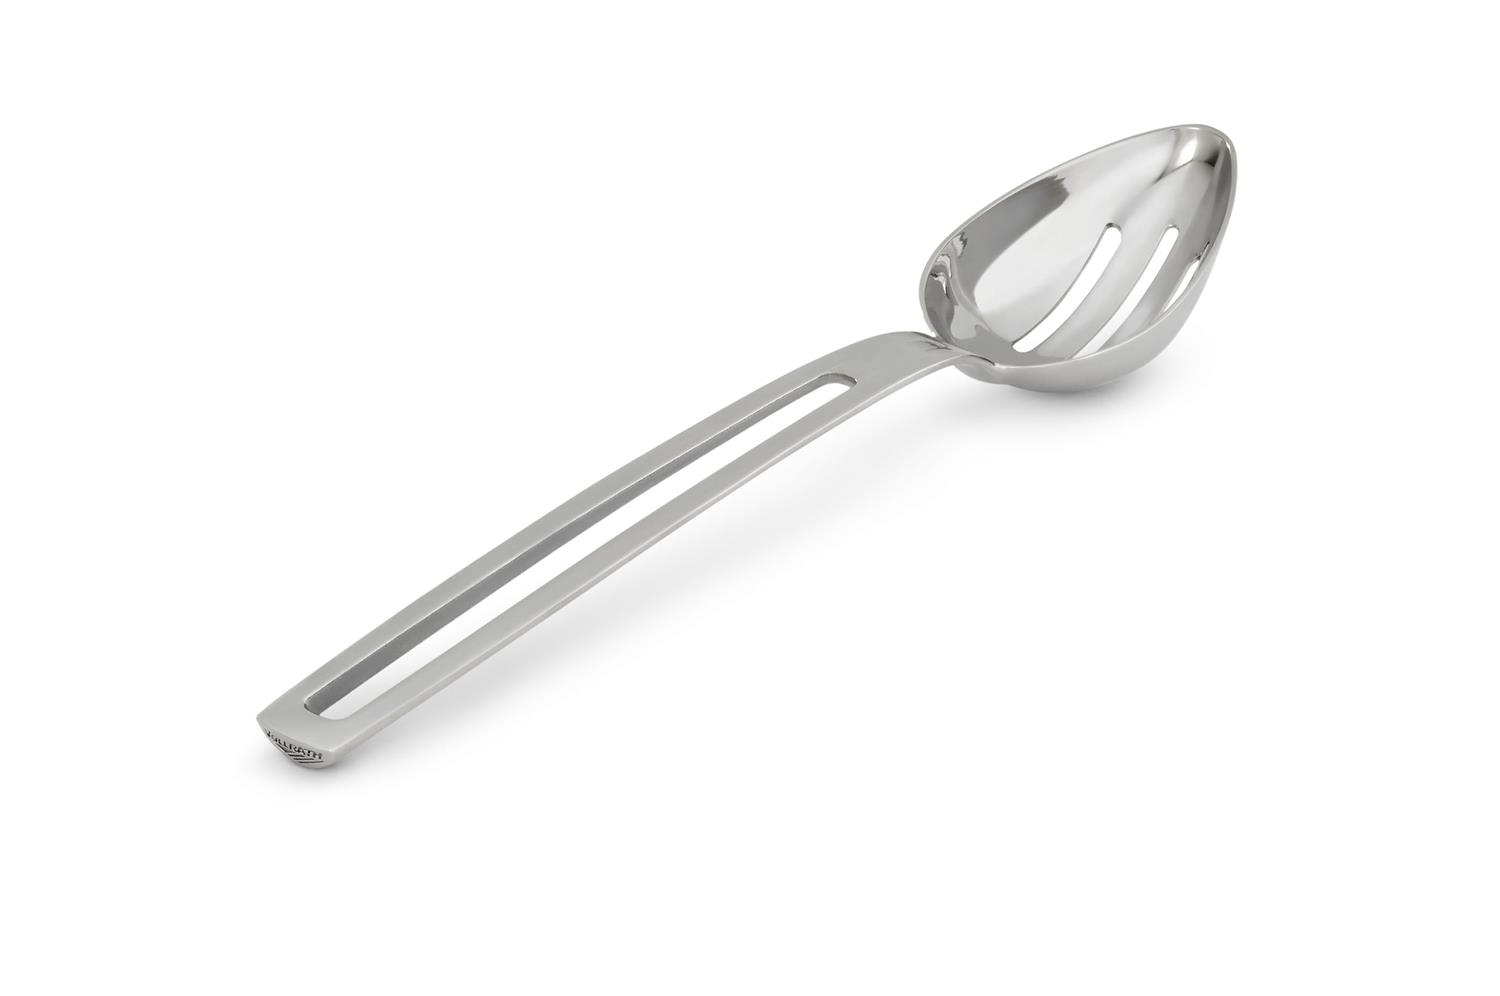 Vollrath 46727 Oval Serving Spoon, Slotted Bowl,